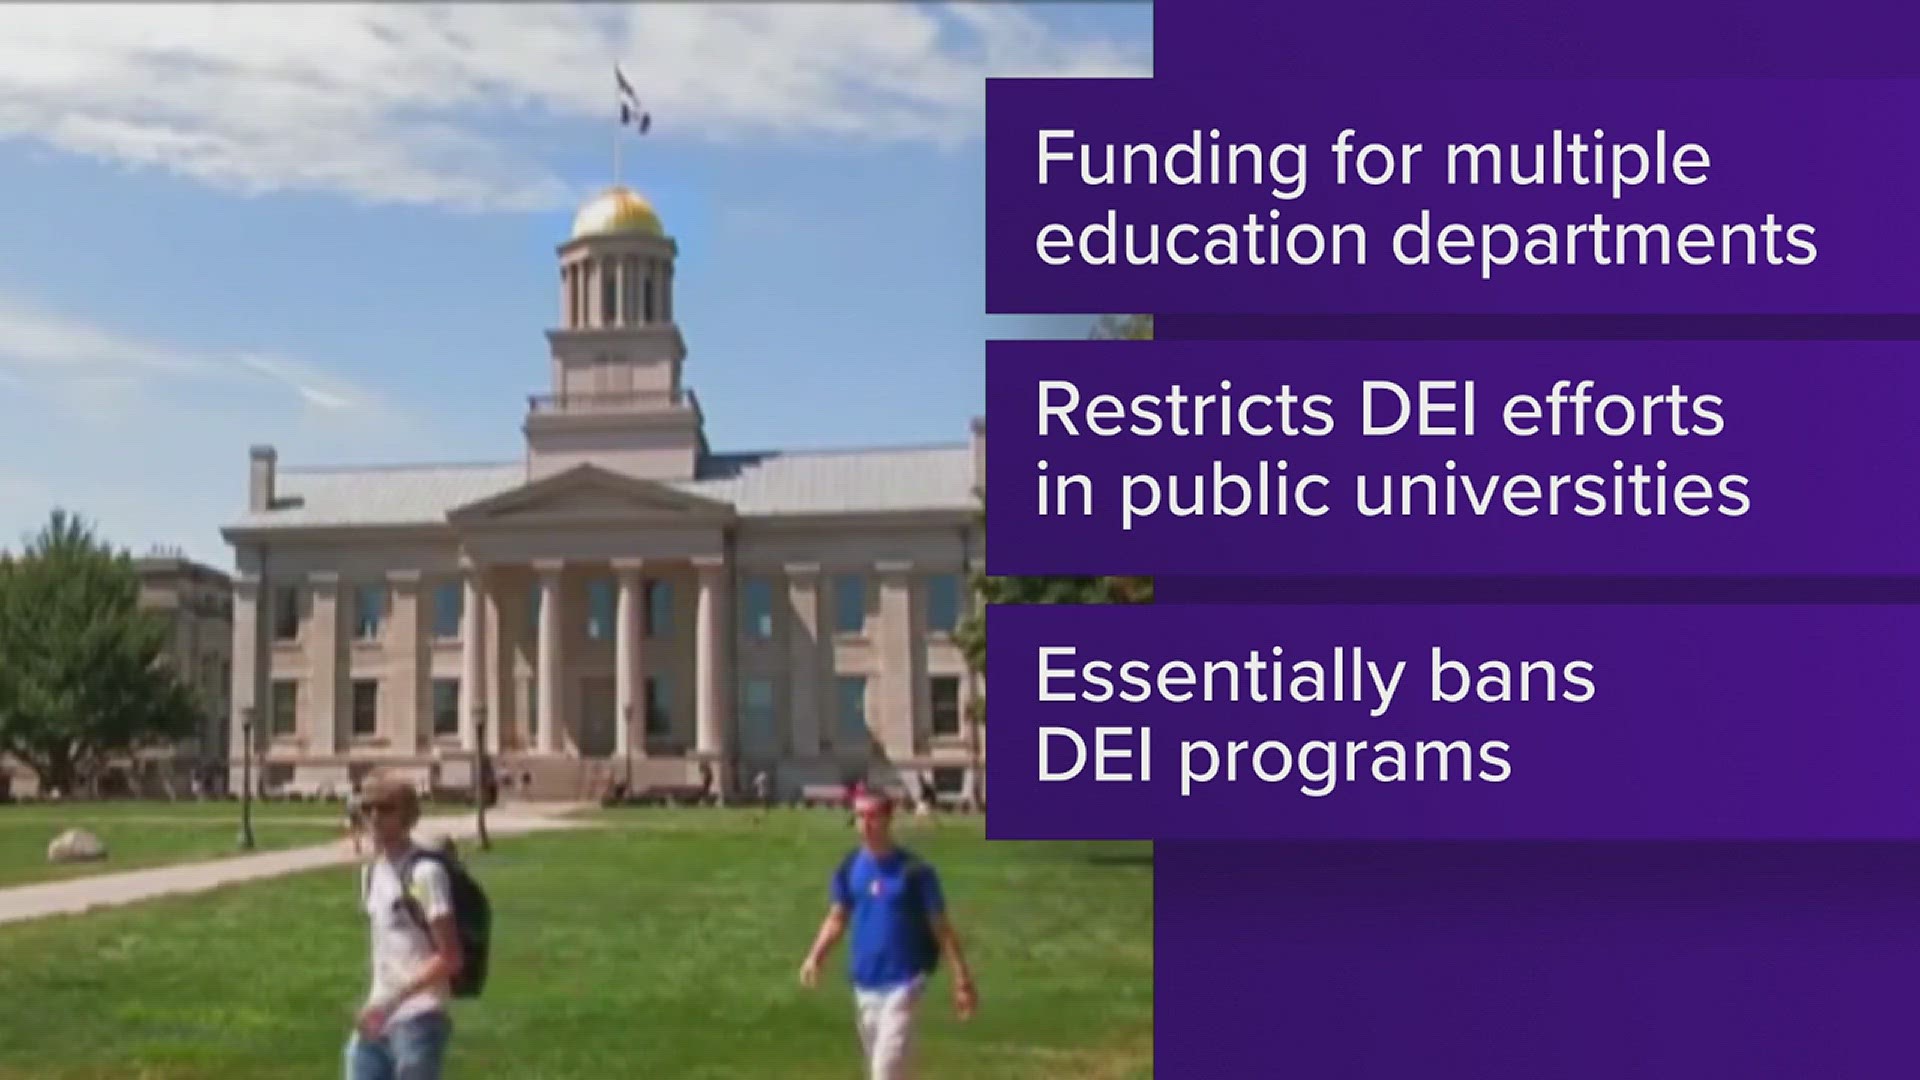 The budget plan restricts spending on Diversity, Equity and Inclusion efforts, and public universities wouldn't be allowed to create or continue running DEI offices.